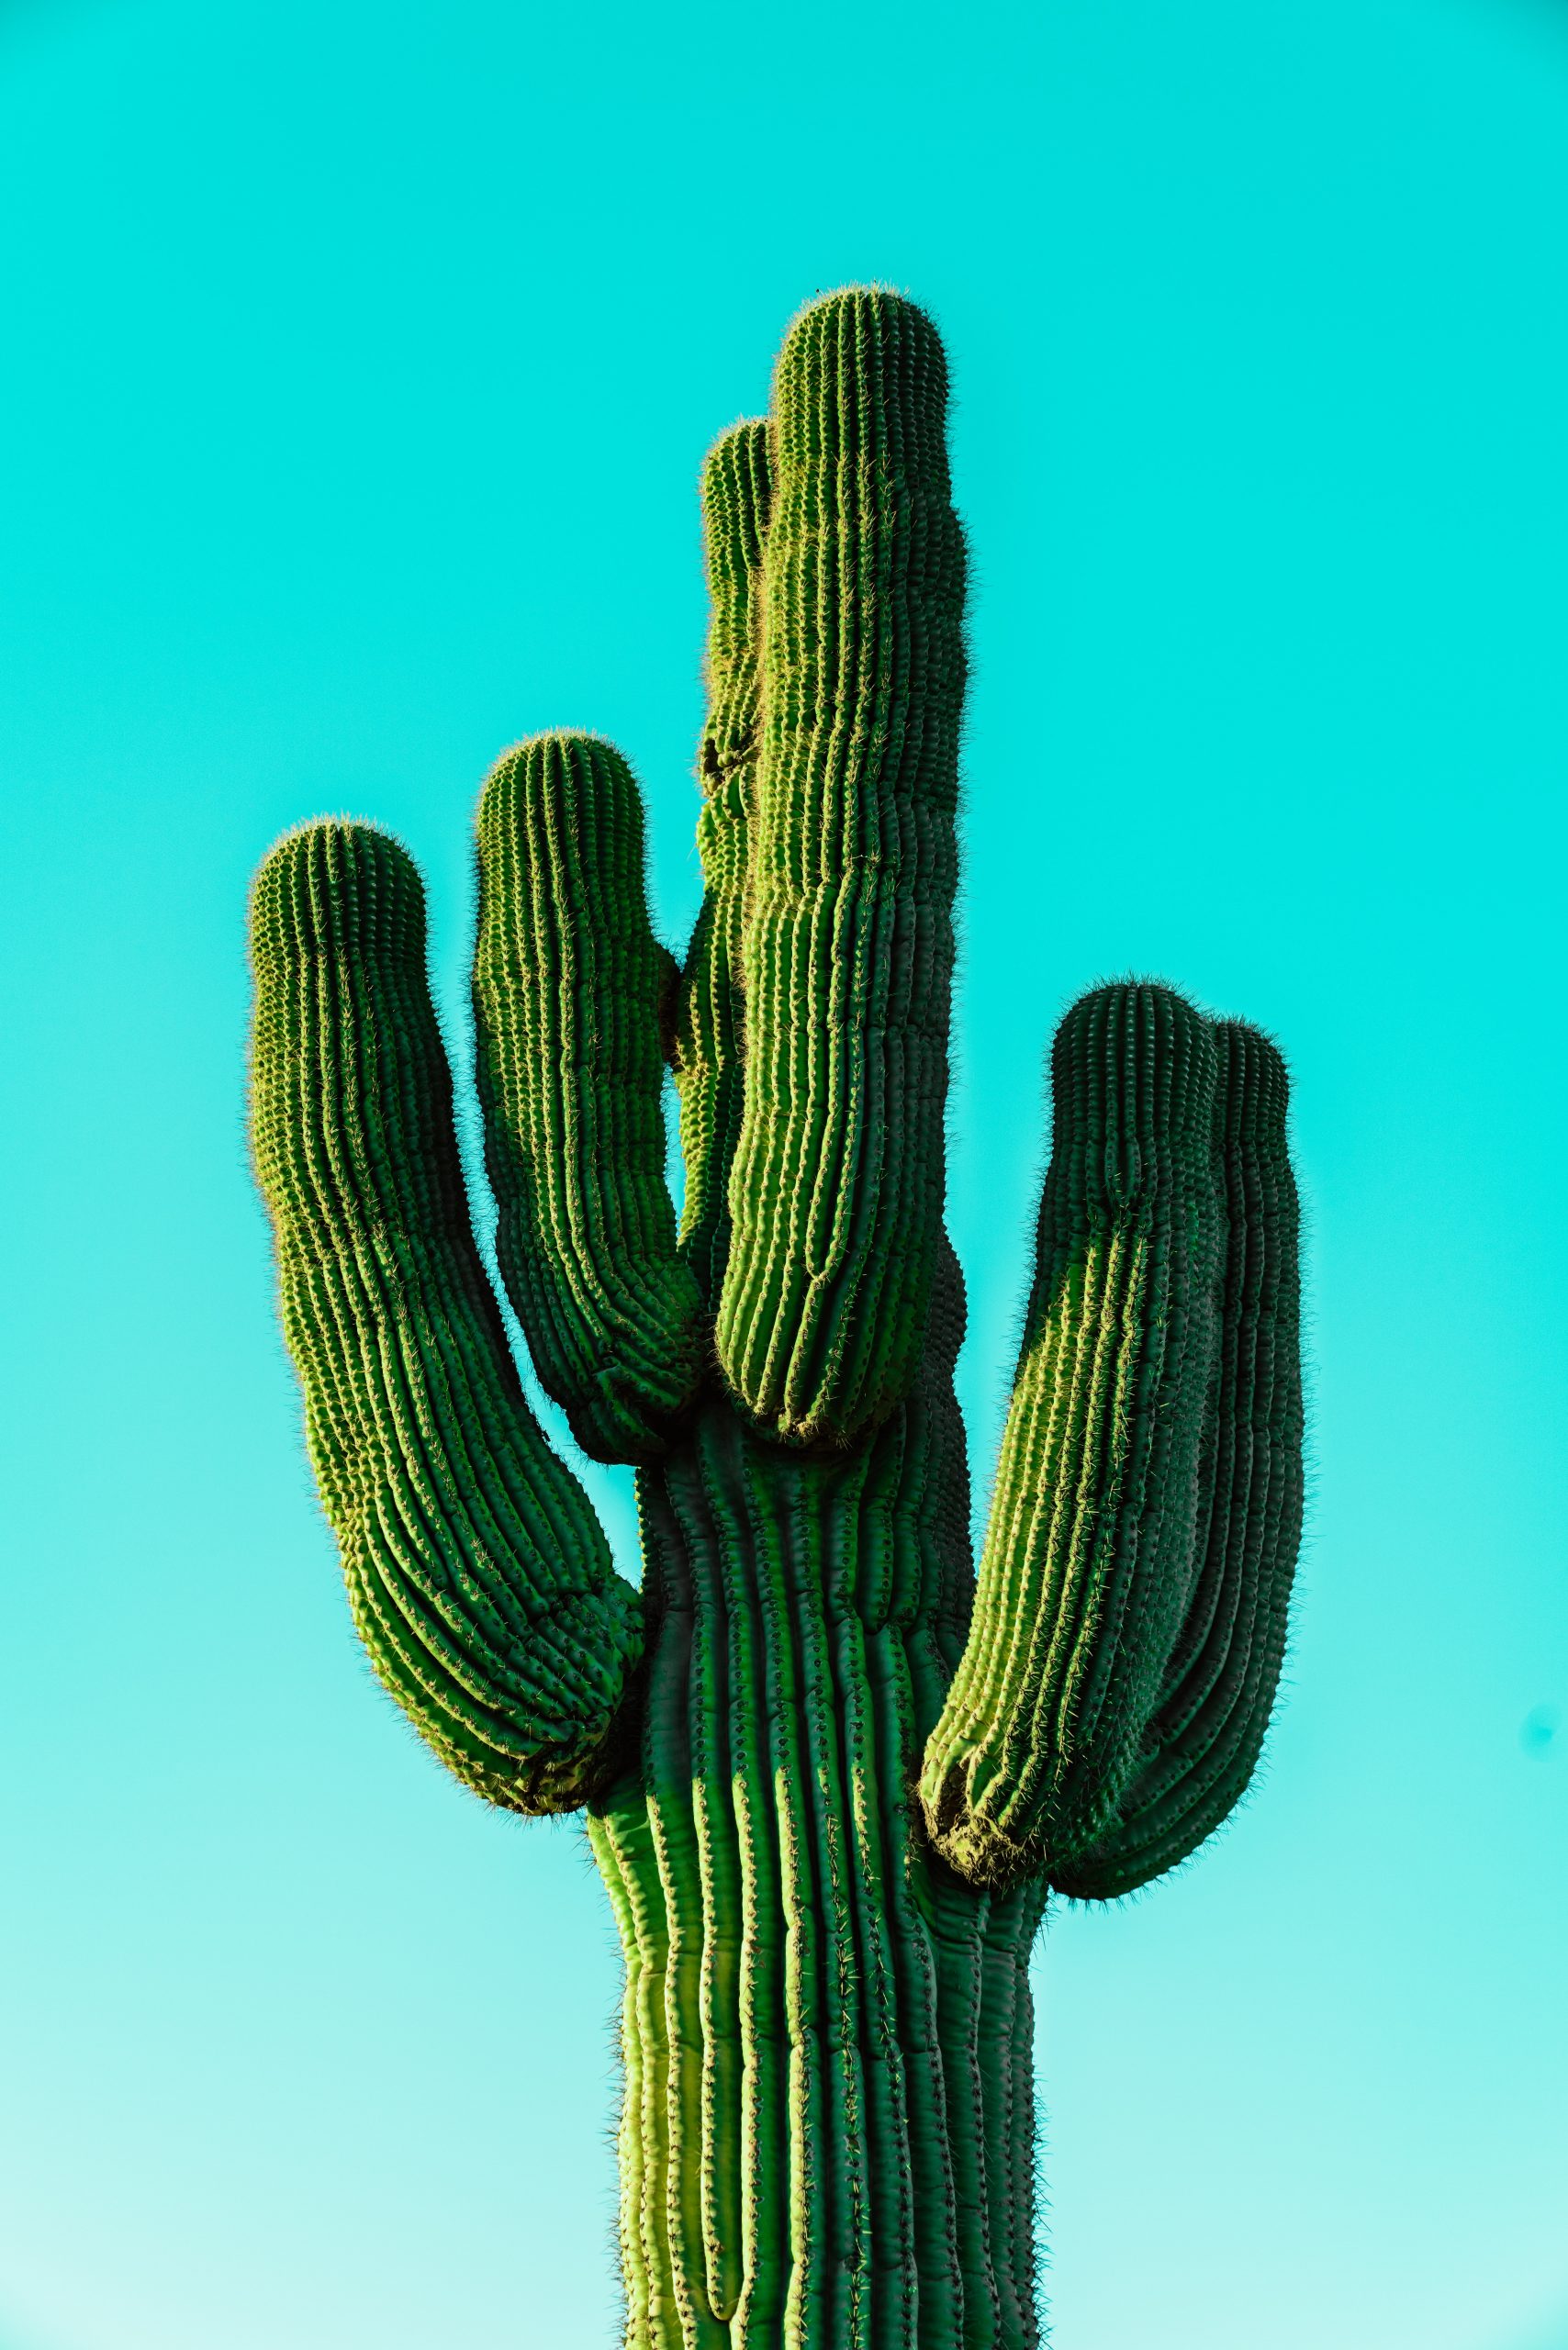 Are Cactus Considered Trees?